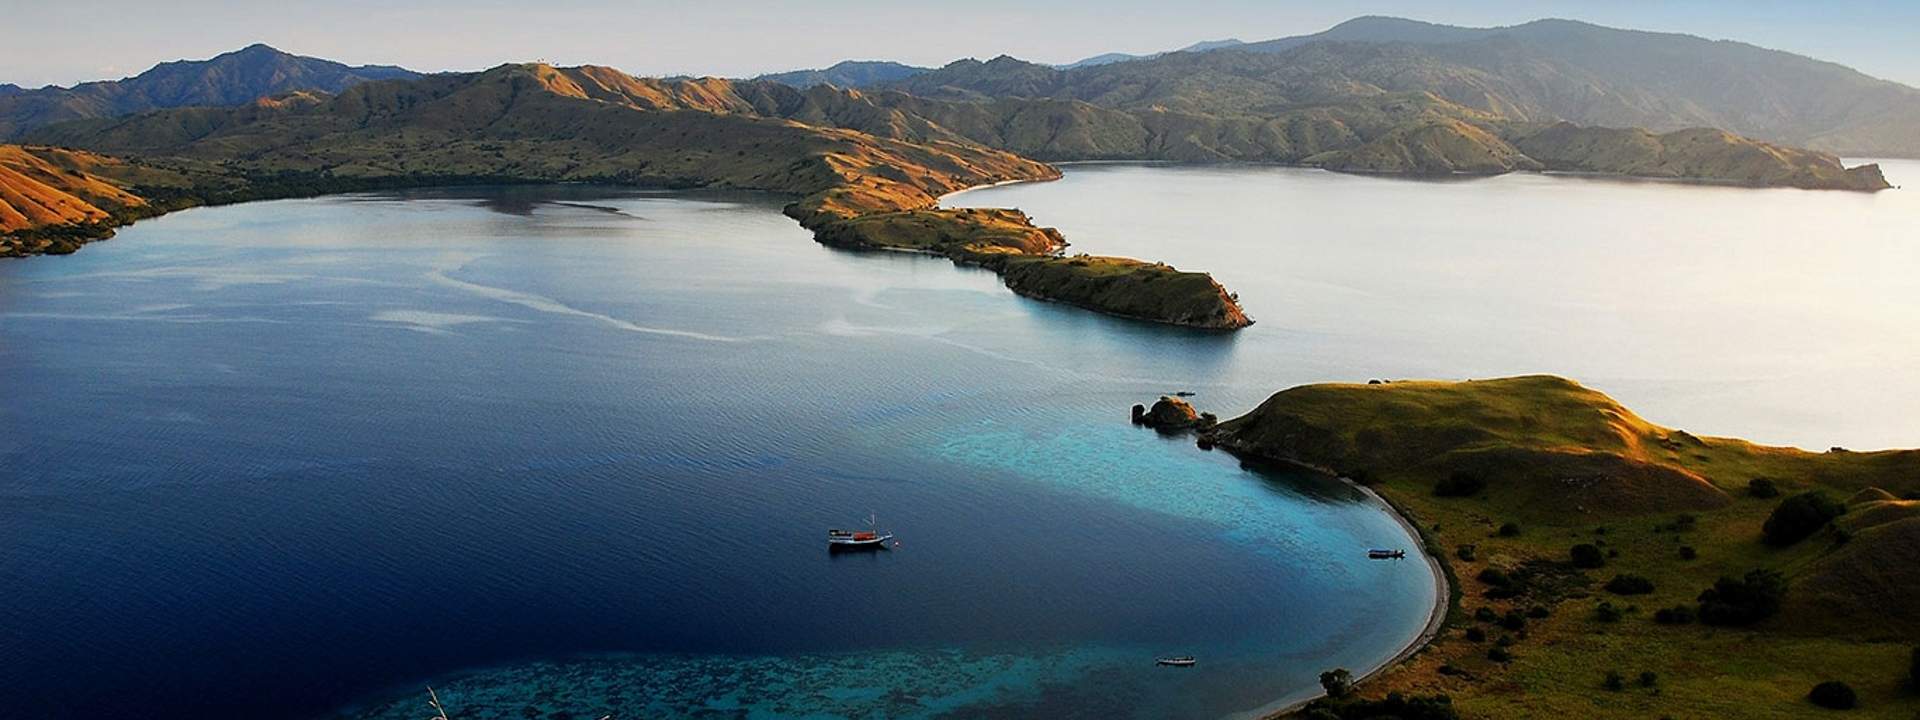 Discover the Komodo National Park on a sailing boat